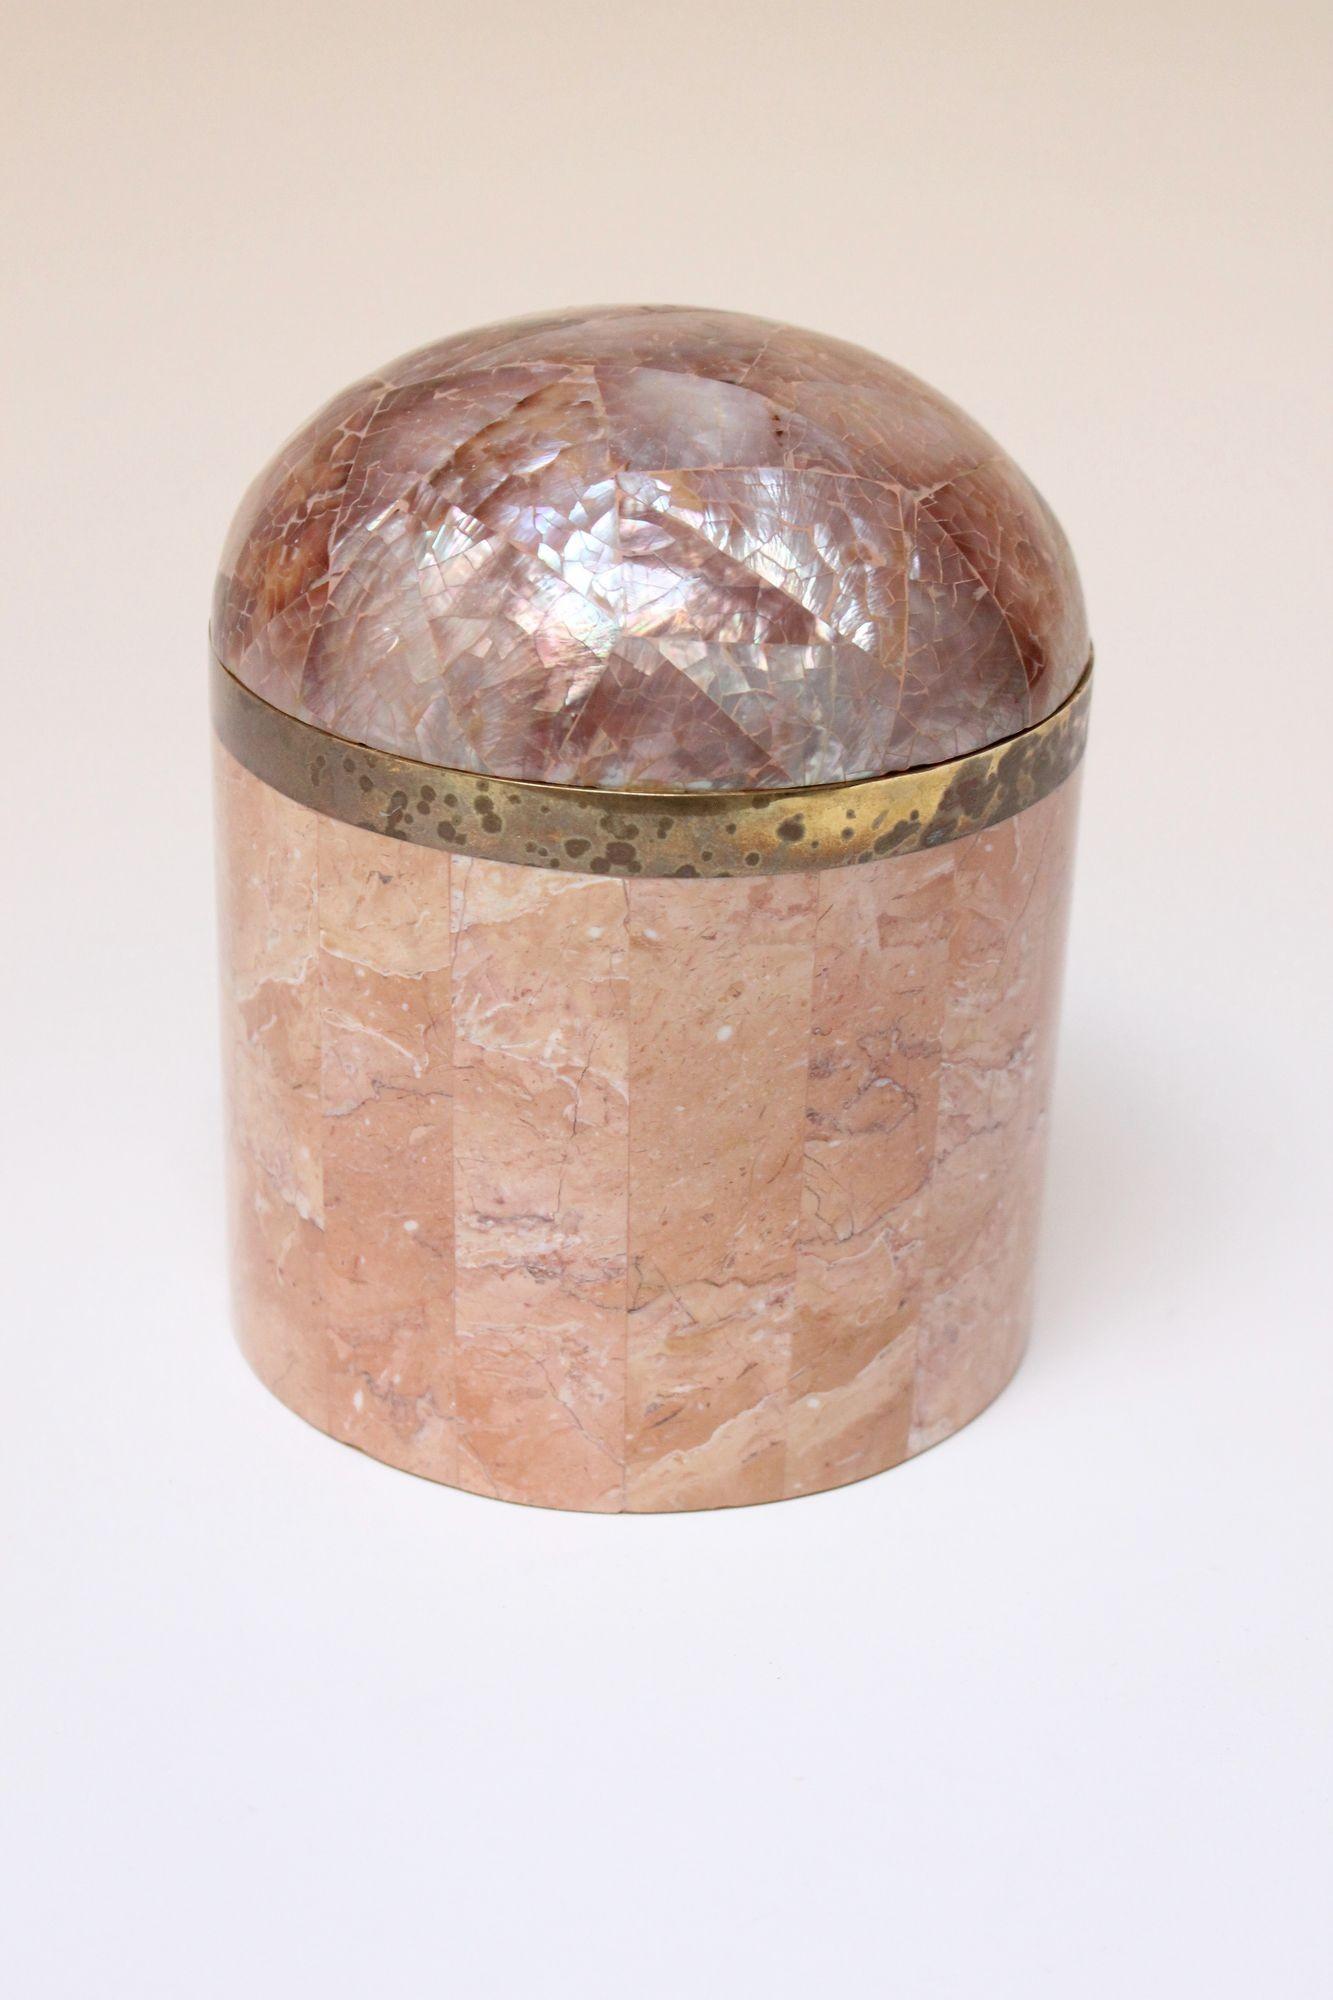 Vintage Maitland Smith or Robert Marcius-style trinket box (circa 1980s, USA).
Box/jar is composed of pink tessellated coral stone with inset brass hardware and an iridescent lilac/mauve abalone shell domed top, both with felted interiors.
Very